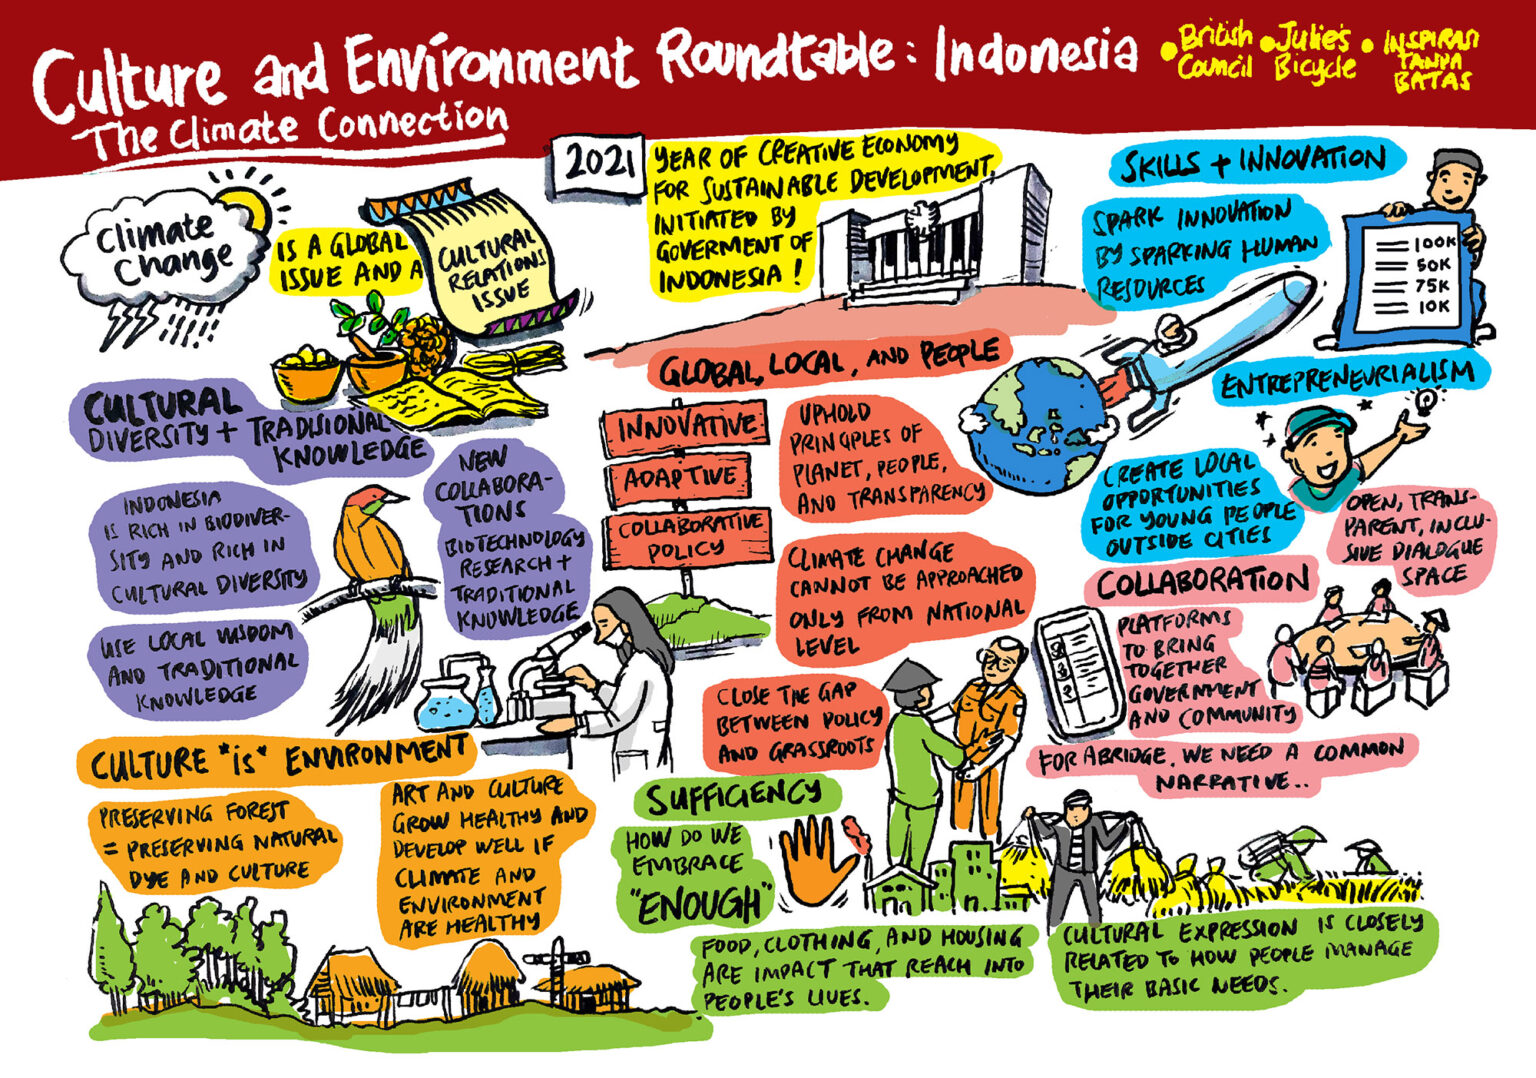 Ilustrasi Climate Connection Culture and Environment Roundtable Indonesia. (Dok. Julie's Bicycle